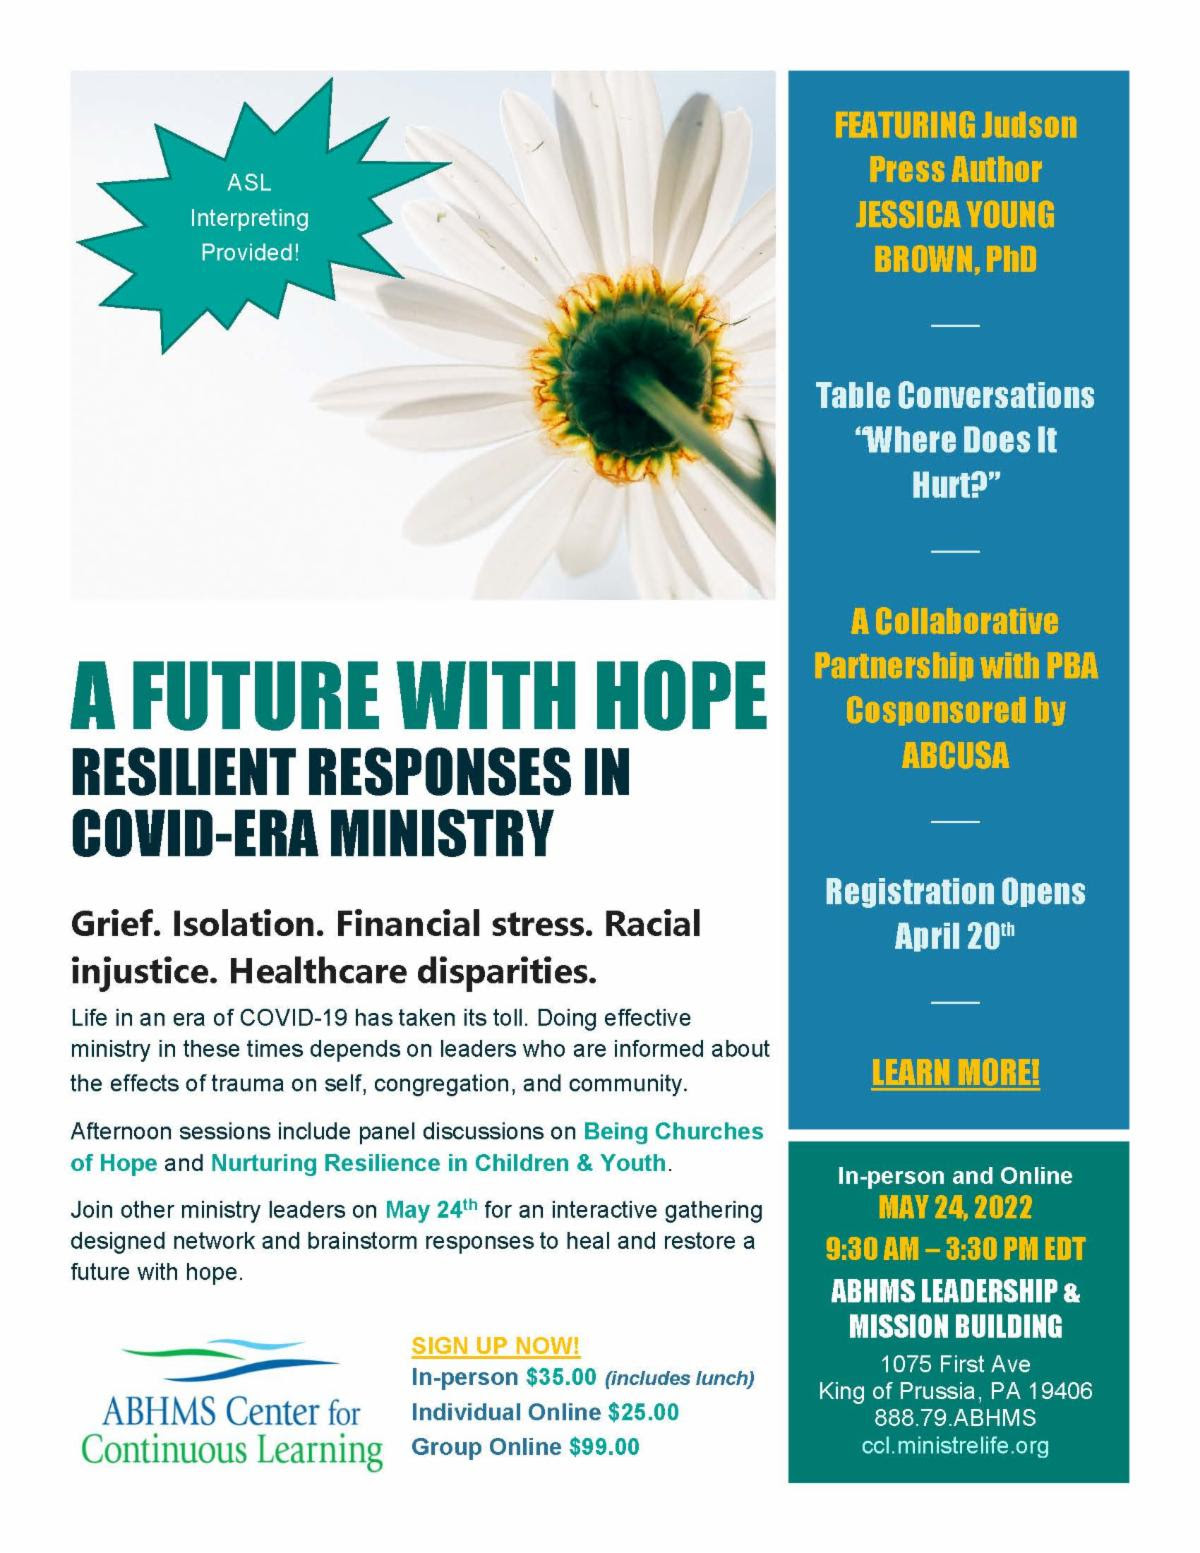 Future with Hope CCL flyer.jpg